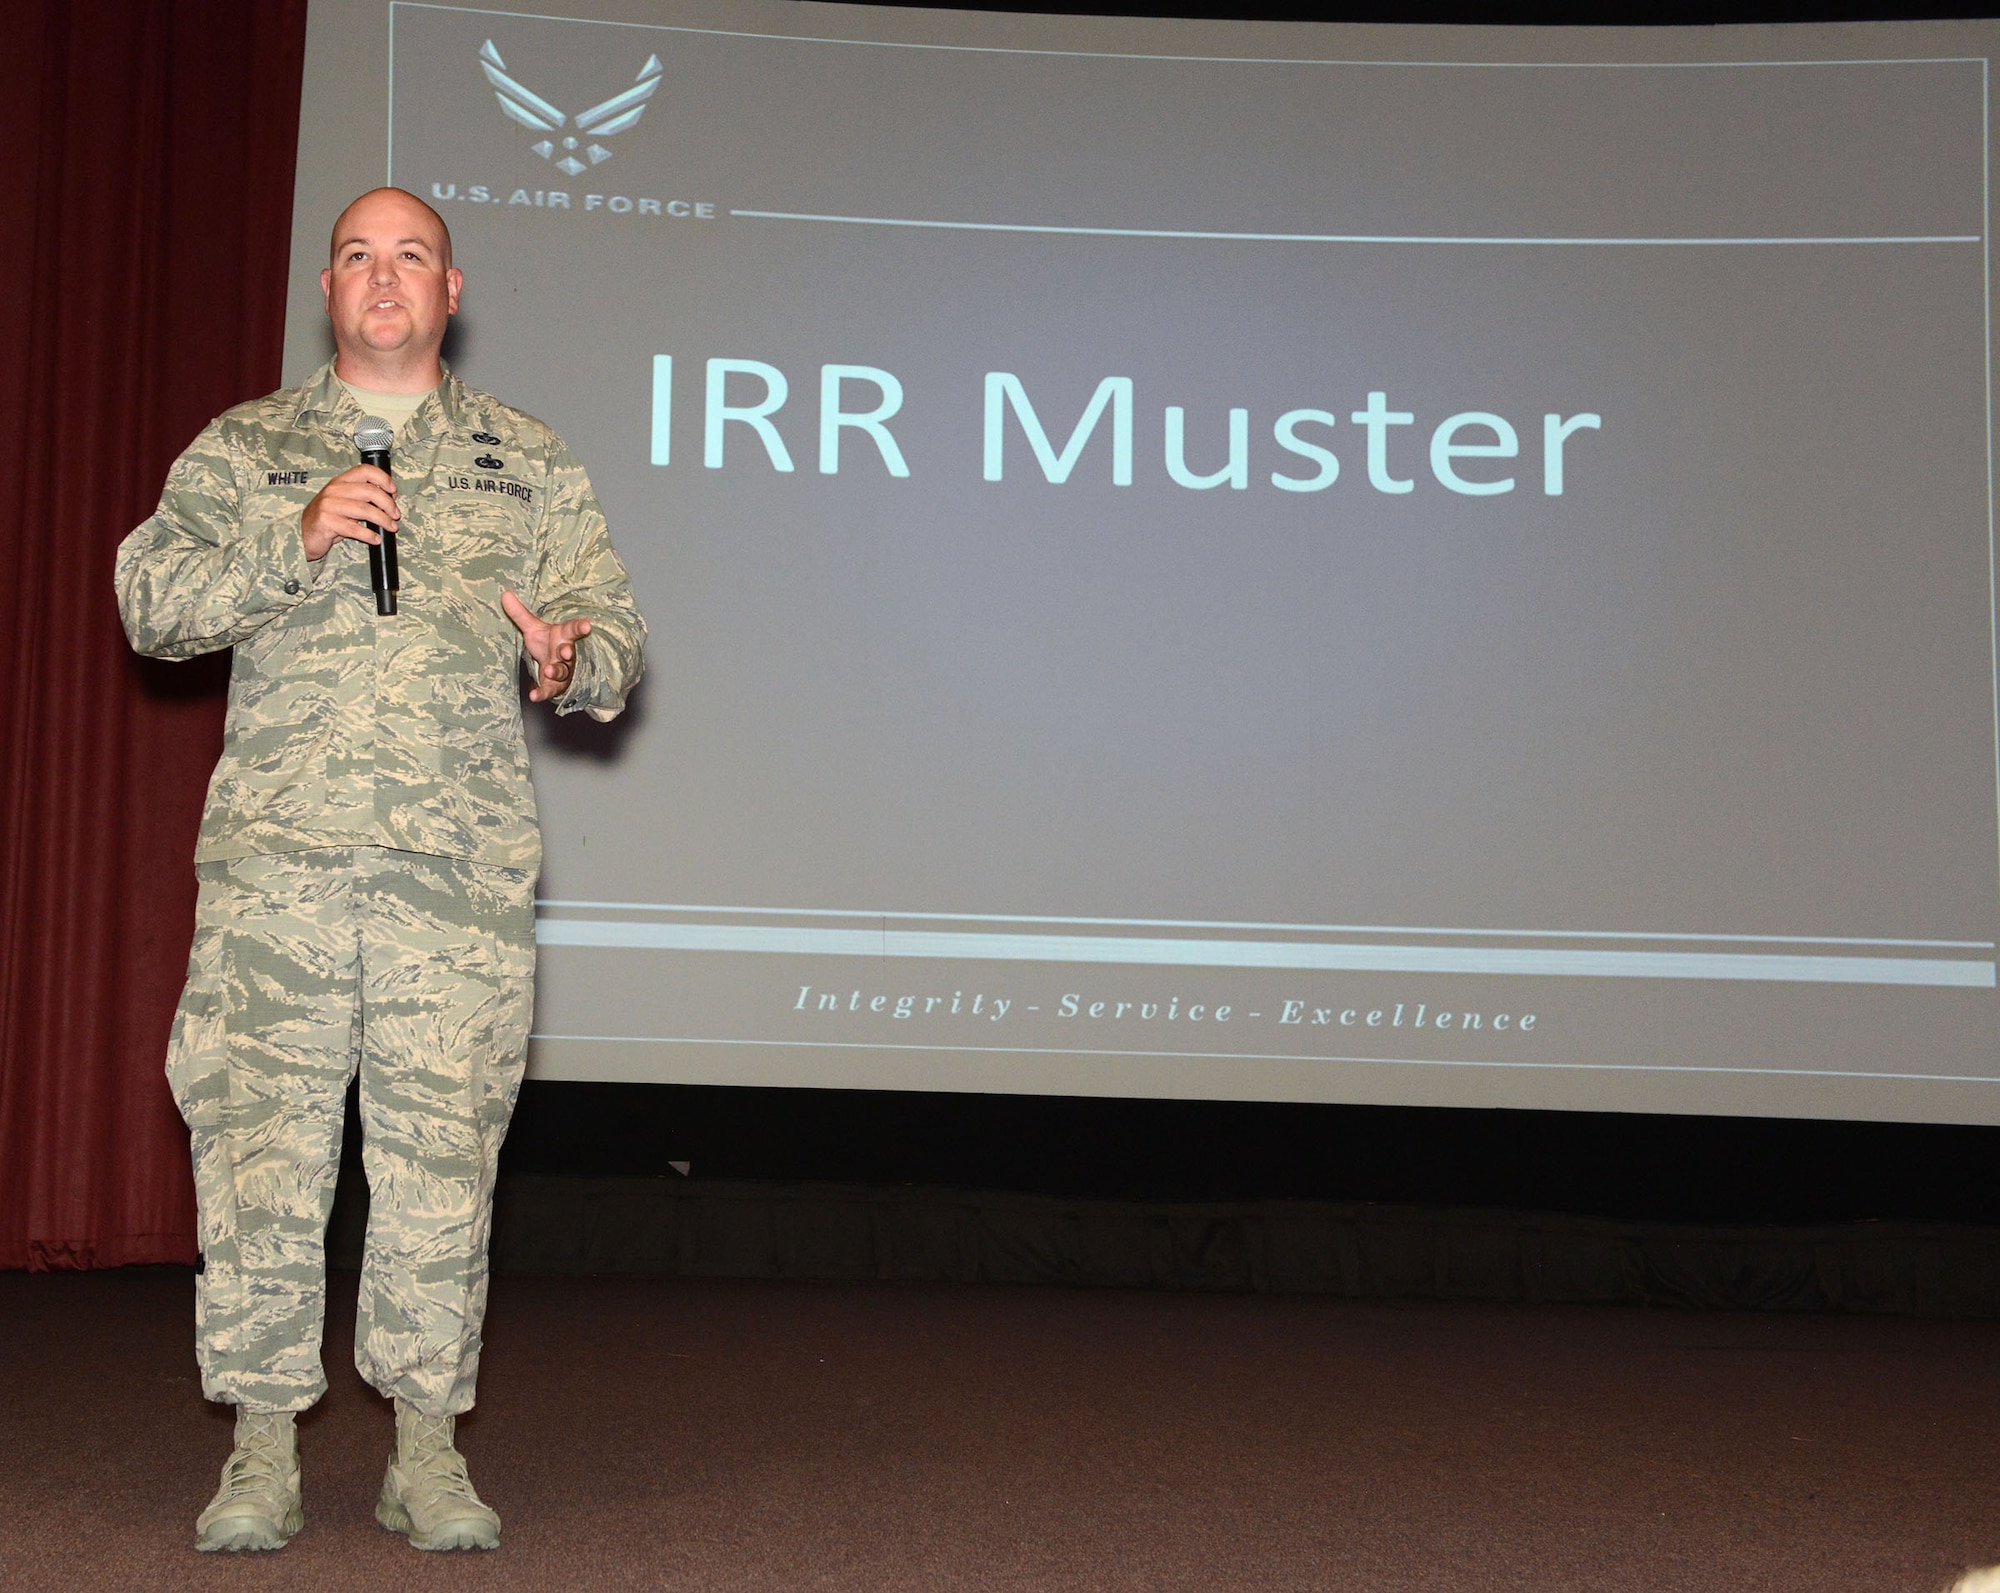 IRR Muster